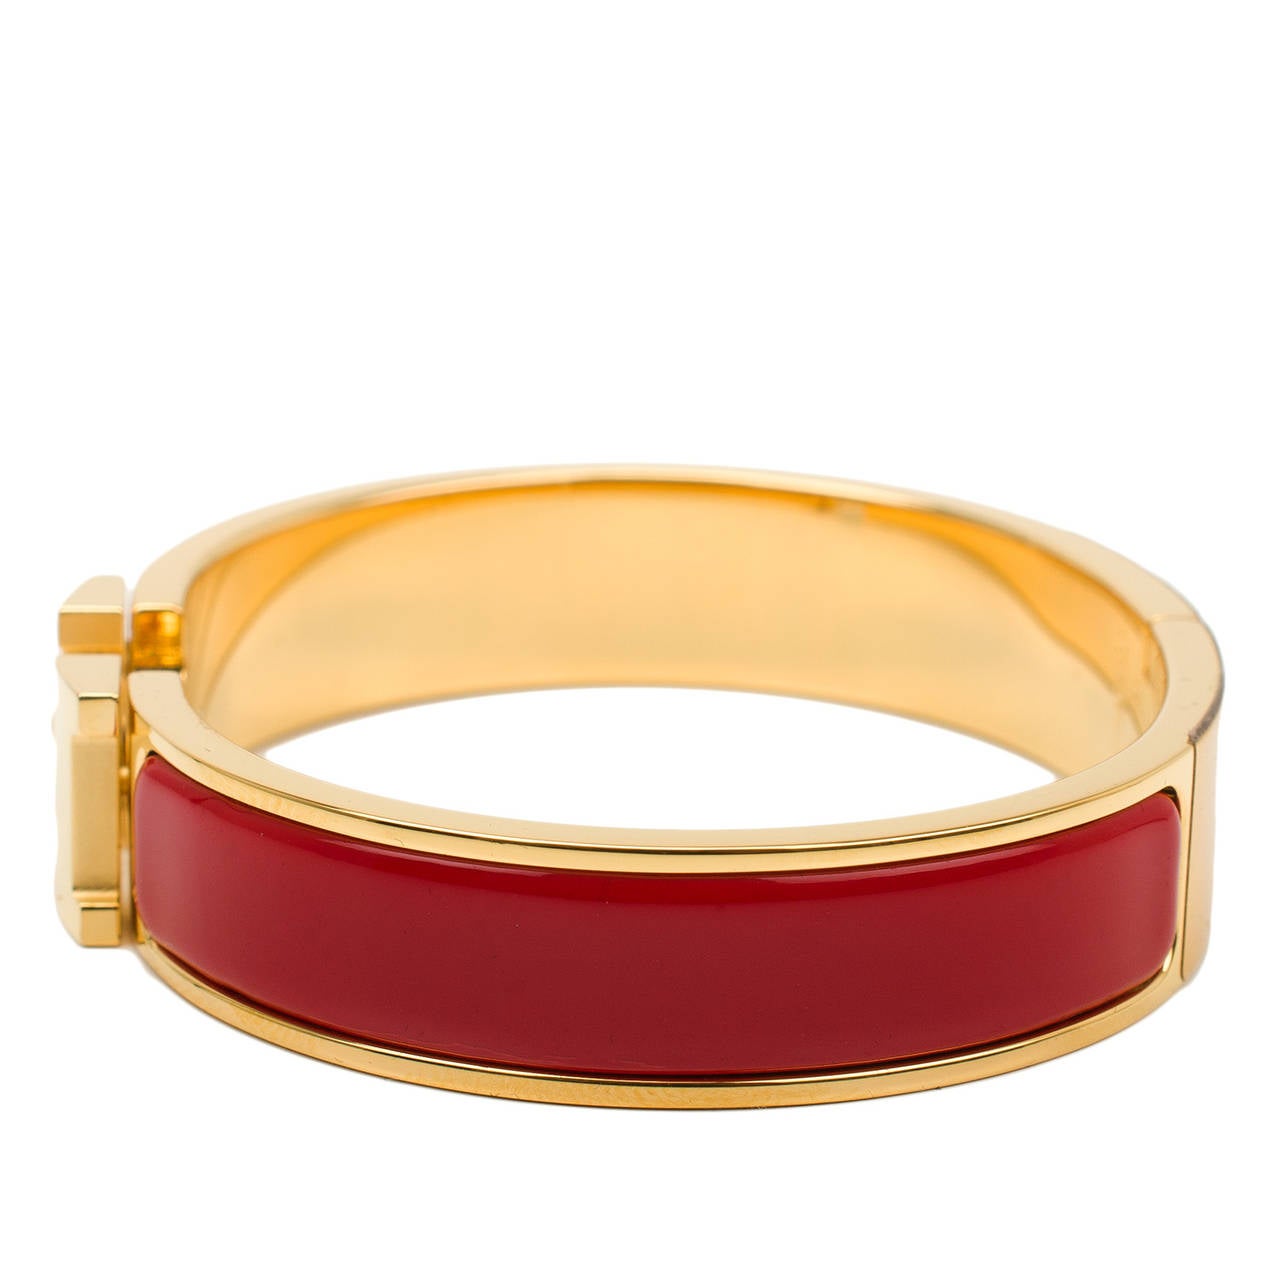 Hermes narrow Clic Clac H bracelet in Amaranth Red enamel with gold plated hardware in size PM.

Hermes is renowned for its enamel and leather bracelets. Hermes printed enamel bangles, enamel Clic Clac H bracelets, and leather/exotic Collier de